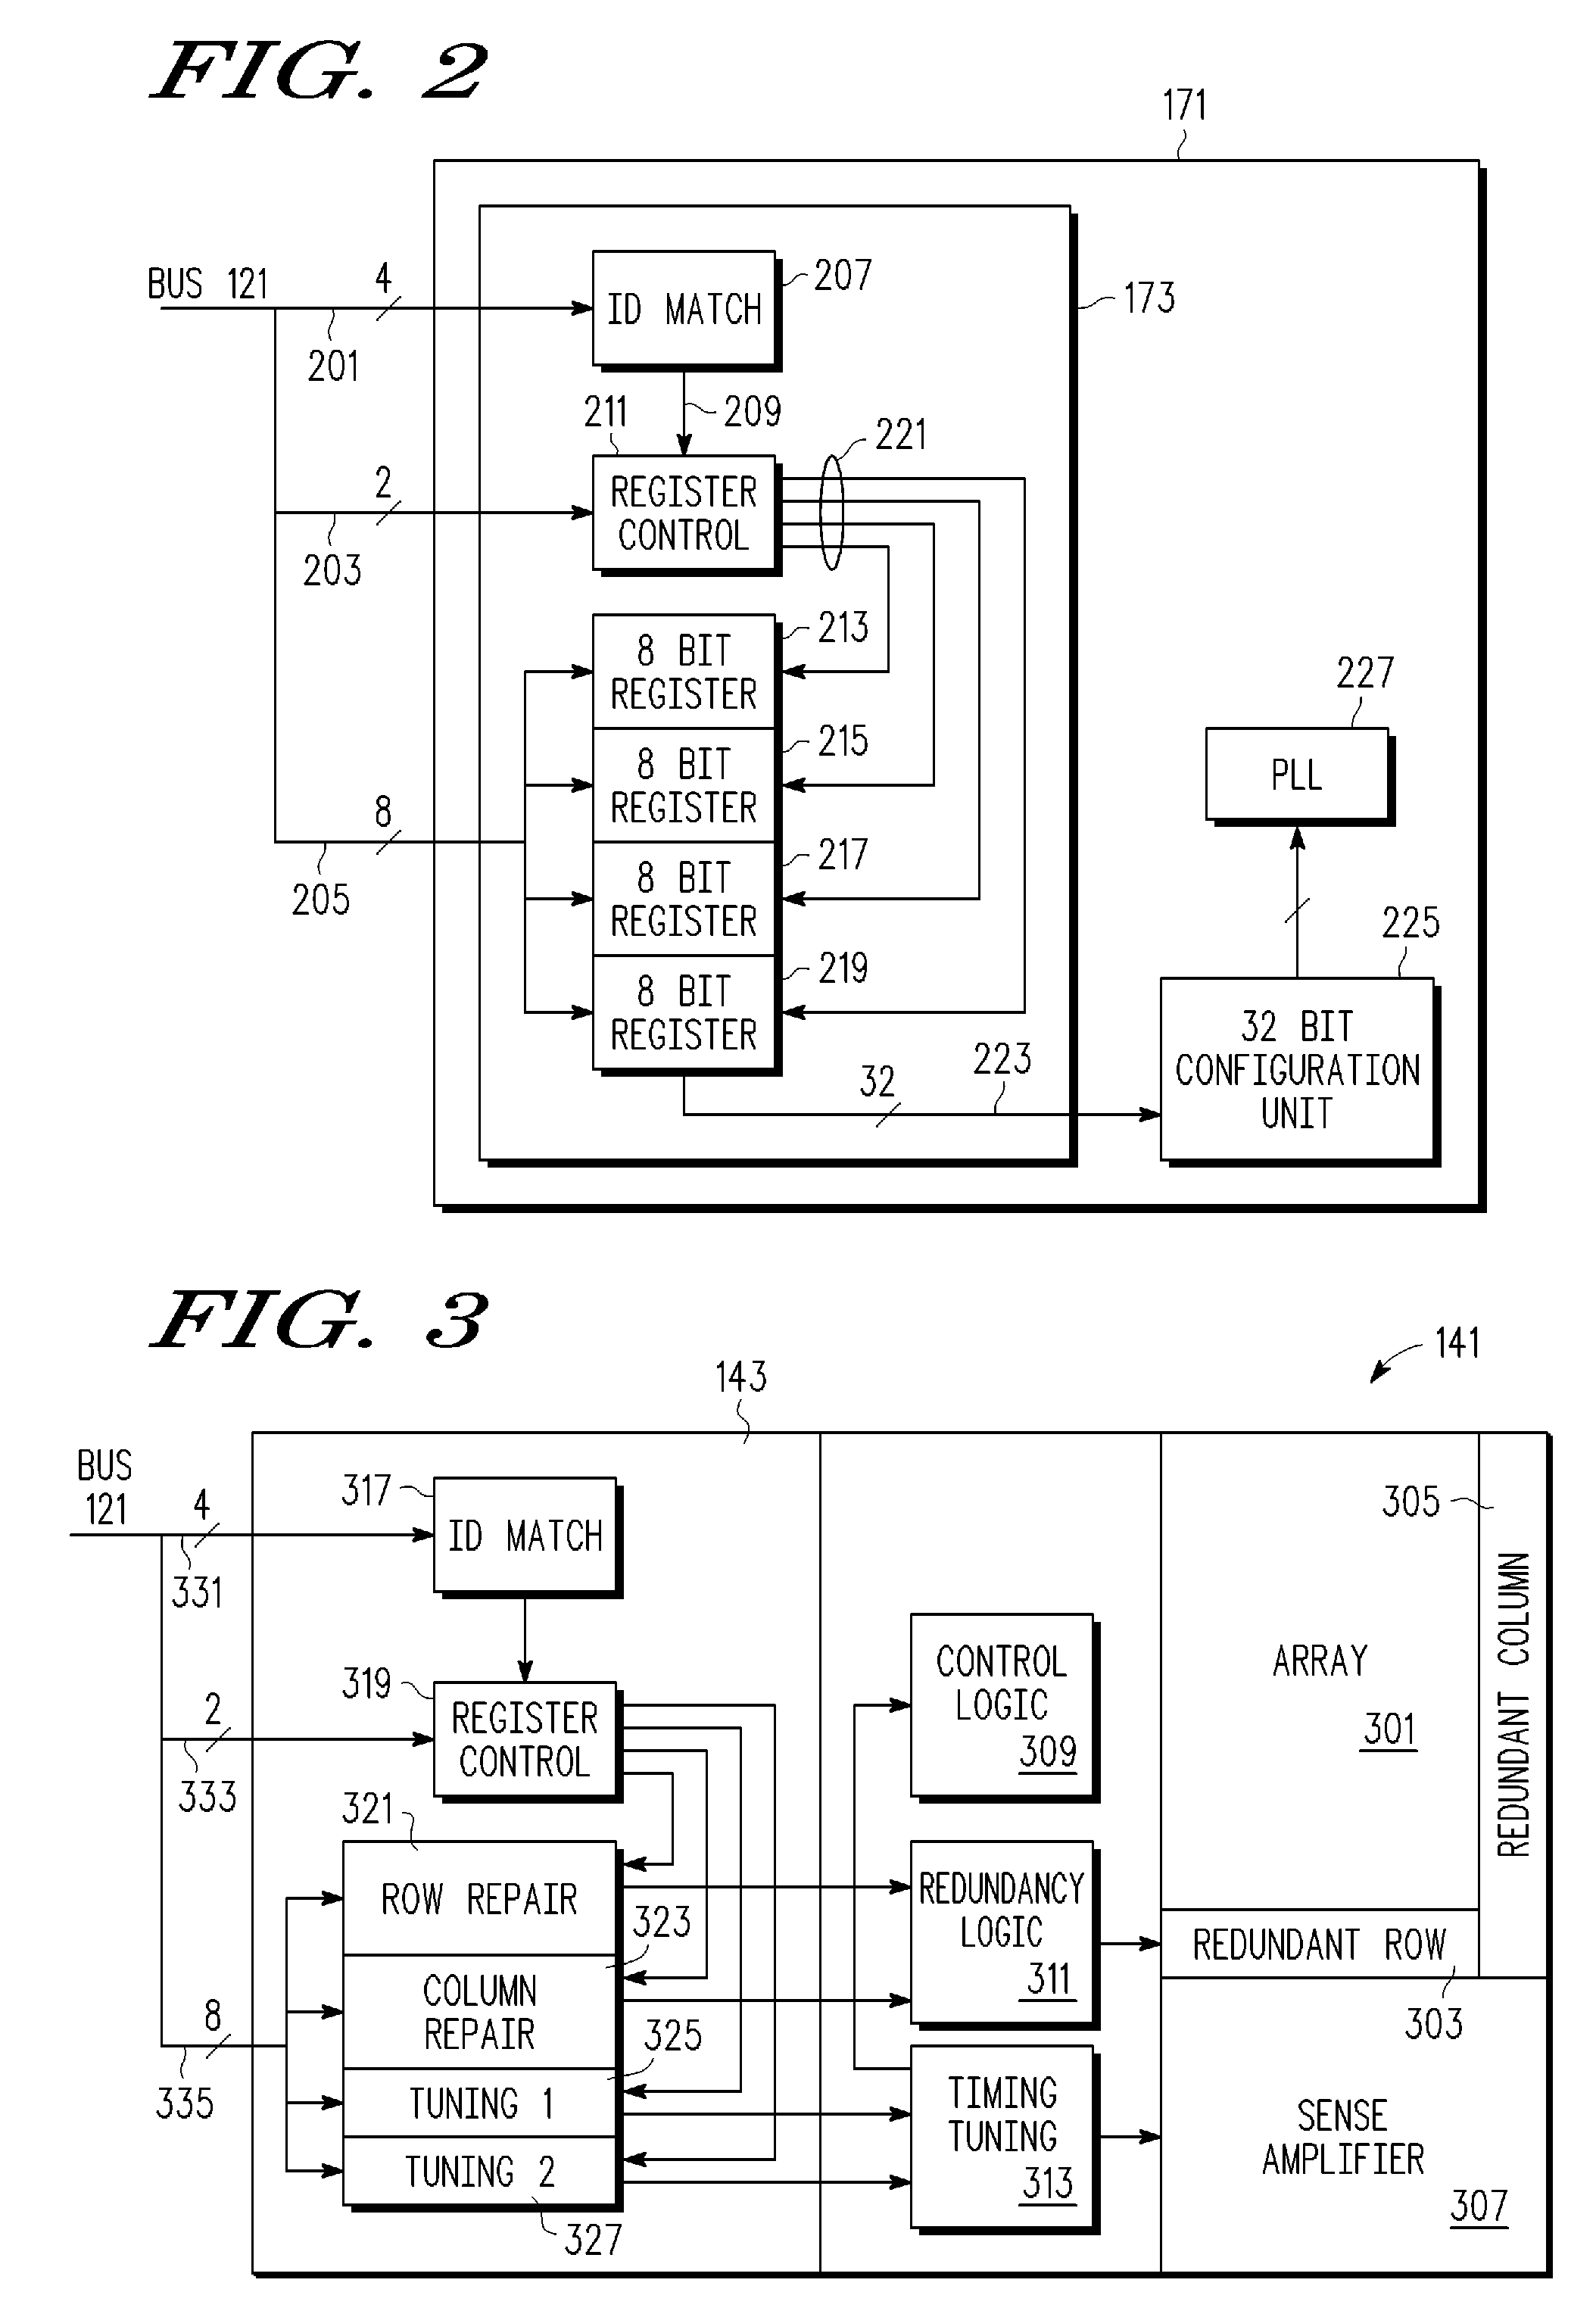 One time programmable element system in an integrated circuit